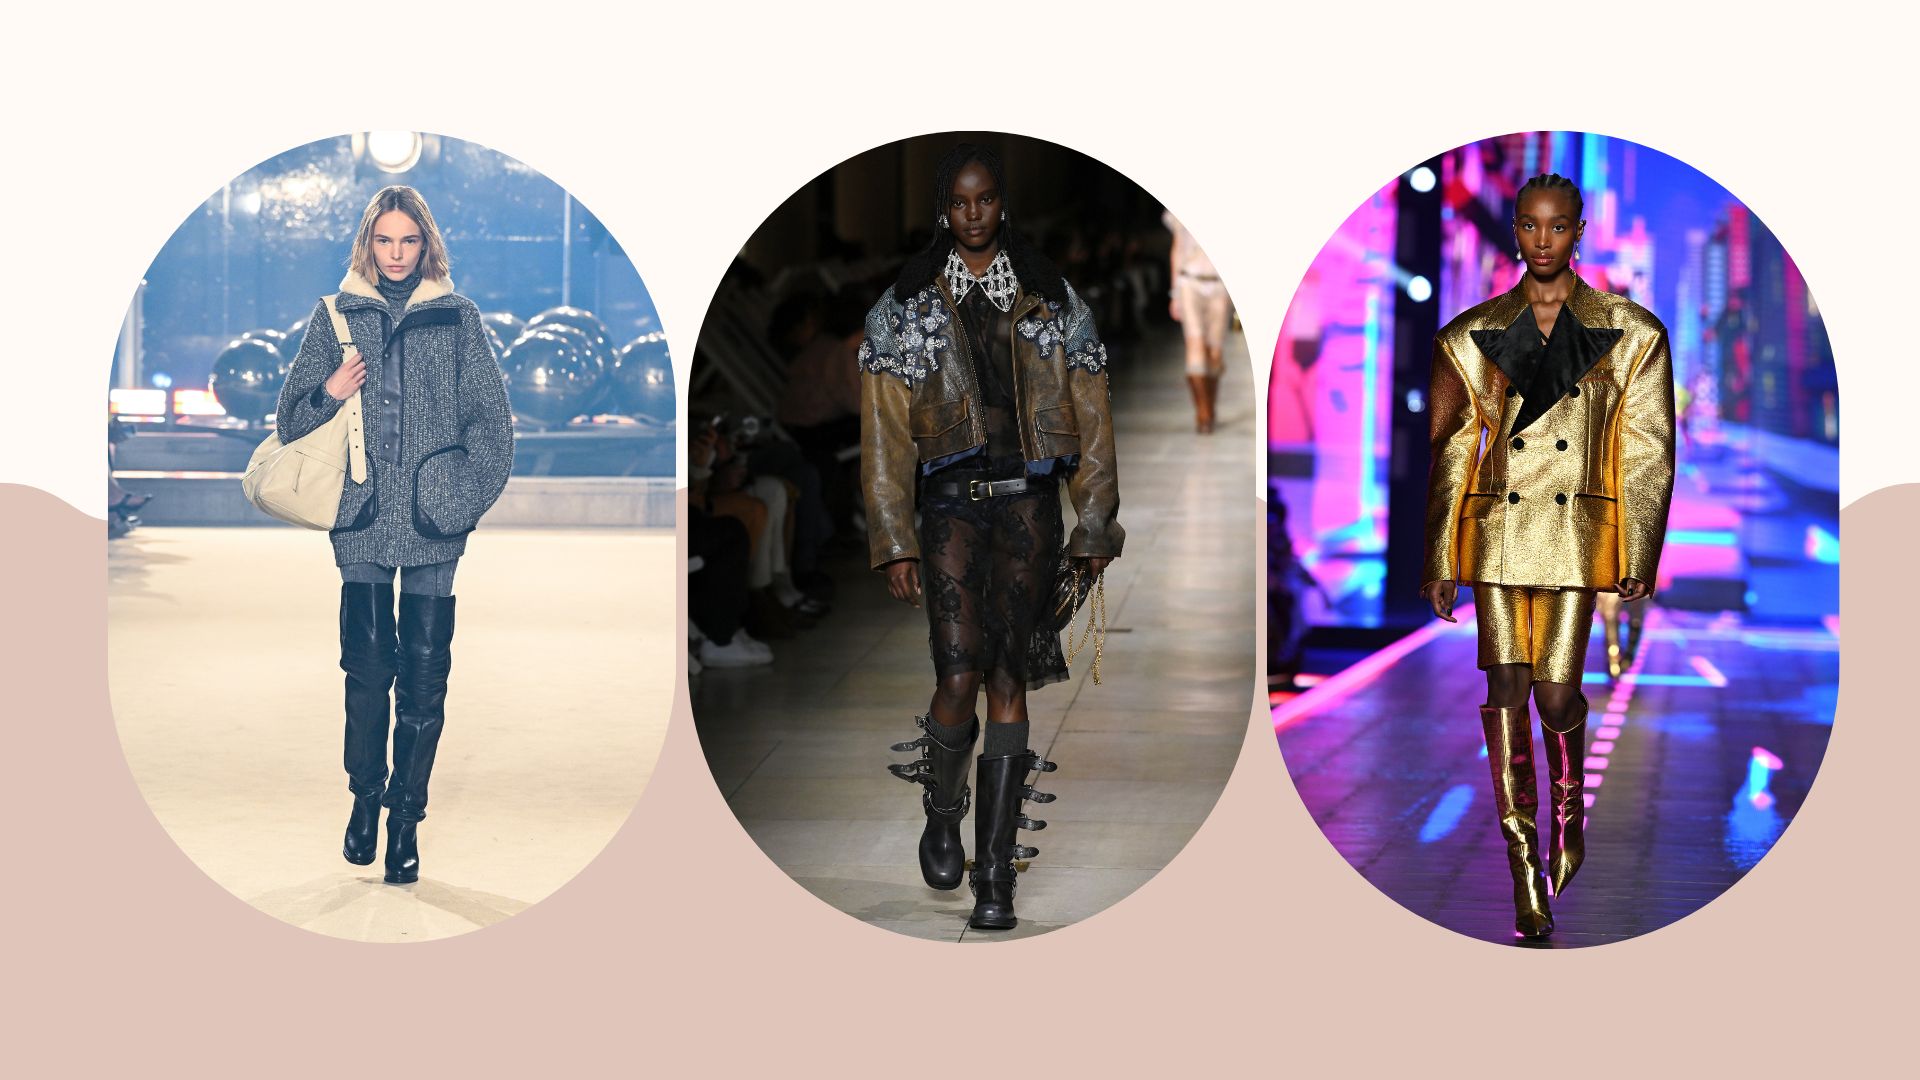 TOP TRENDING BOOTS FOR AUTUMN 2022 - Glam & Glitter